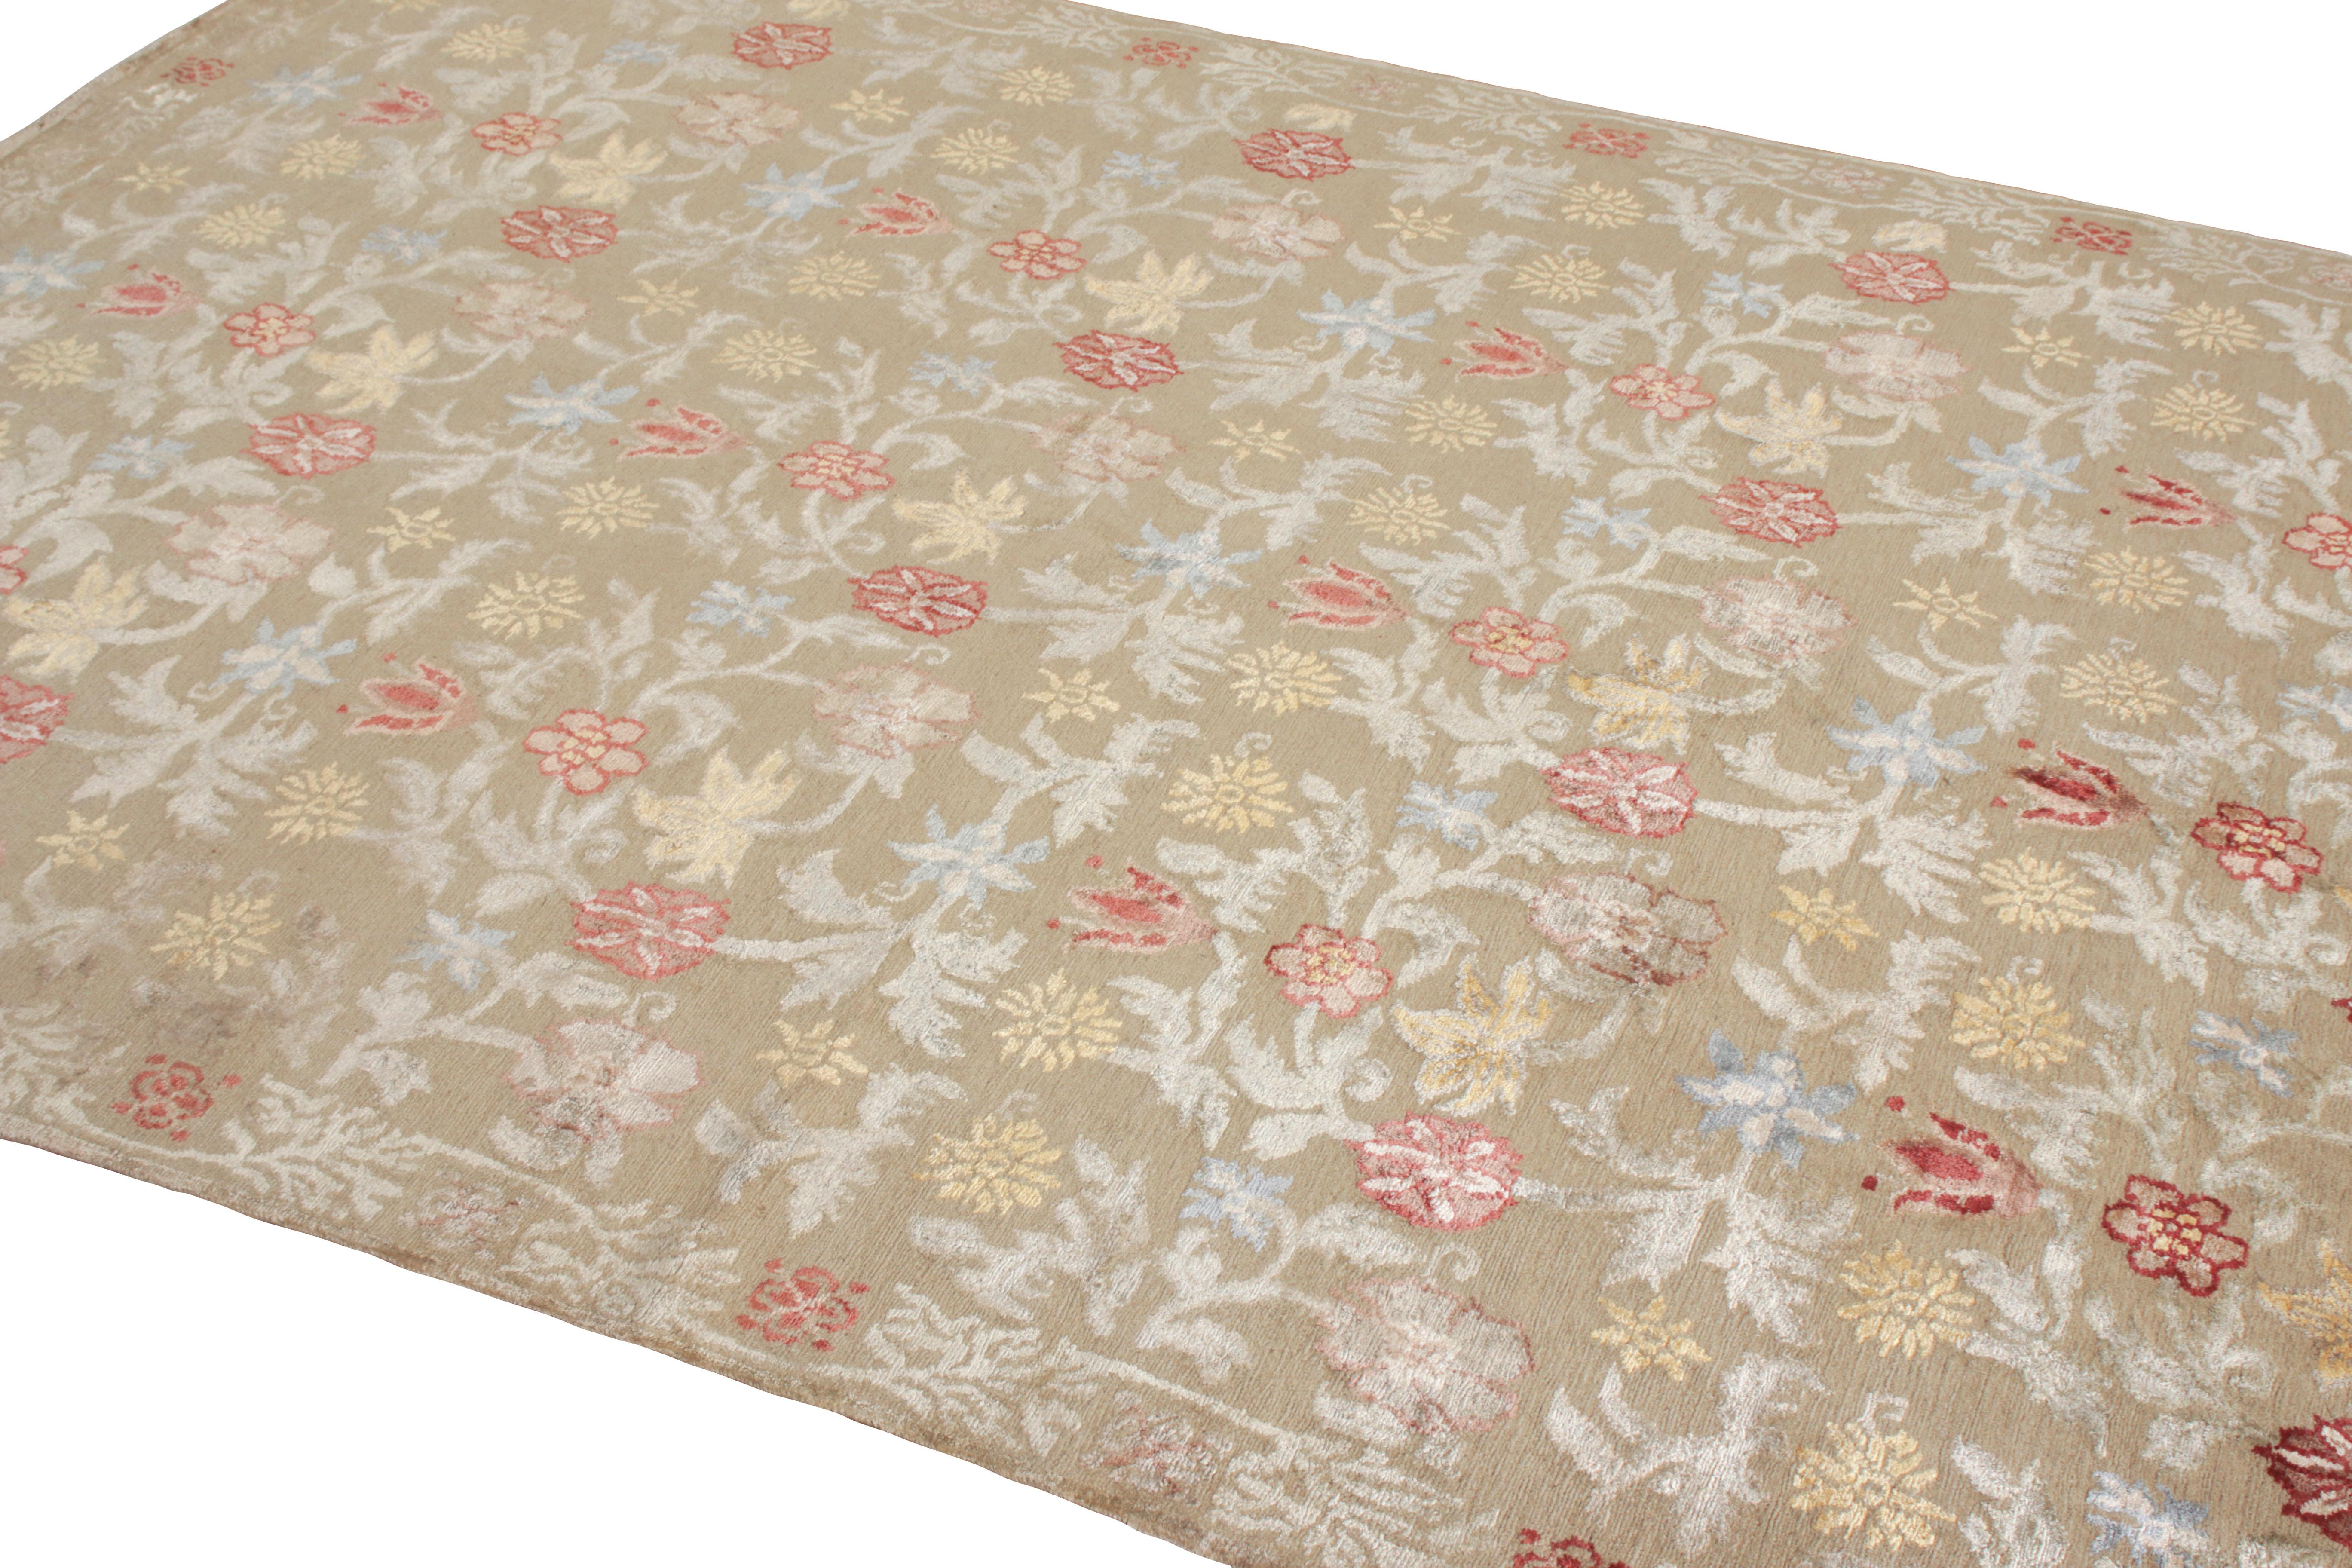 Art Deco Rug & Kilim's Hand Knotted Spanish Style Floral Rug in Beige and Red